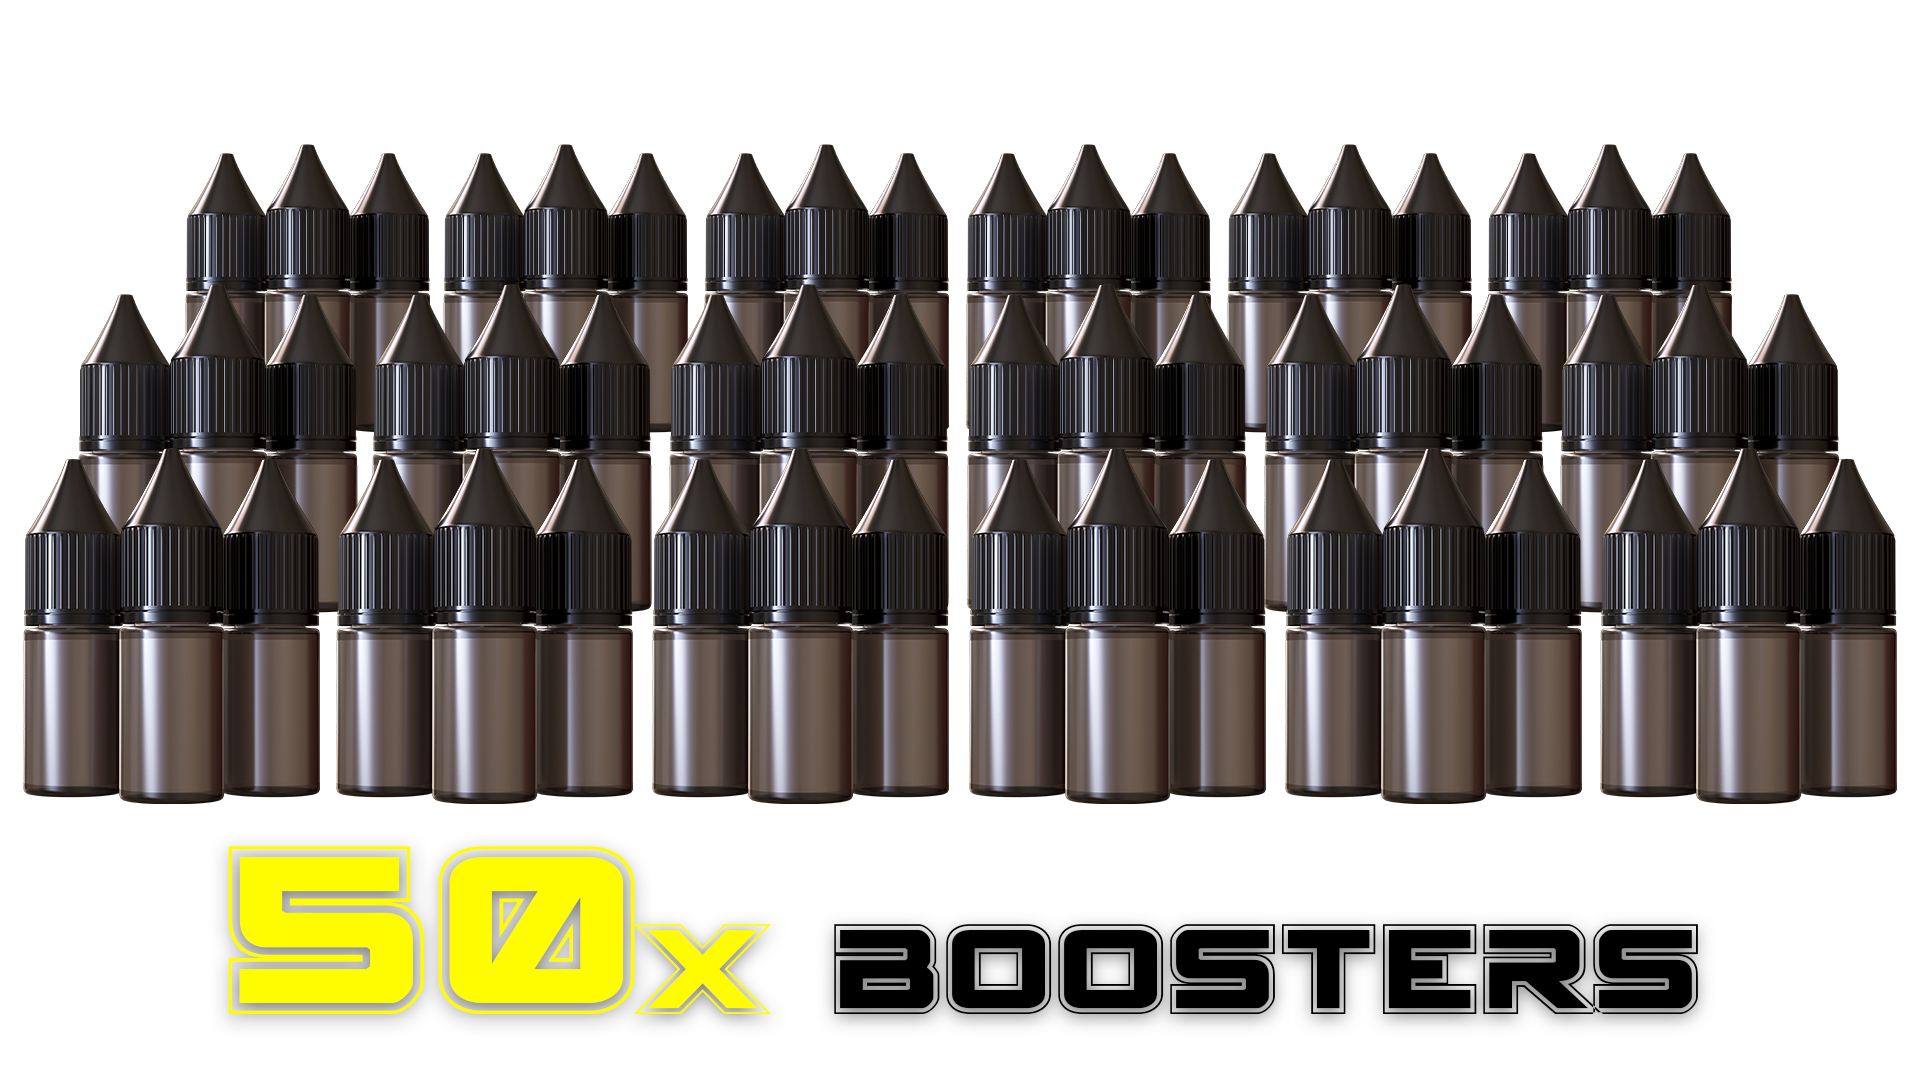 50x boosters slide